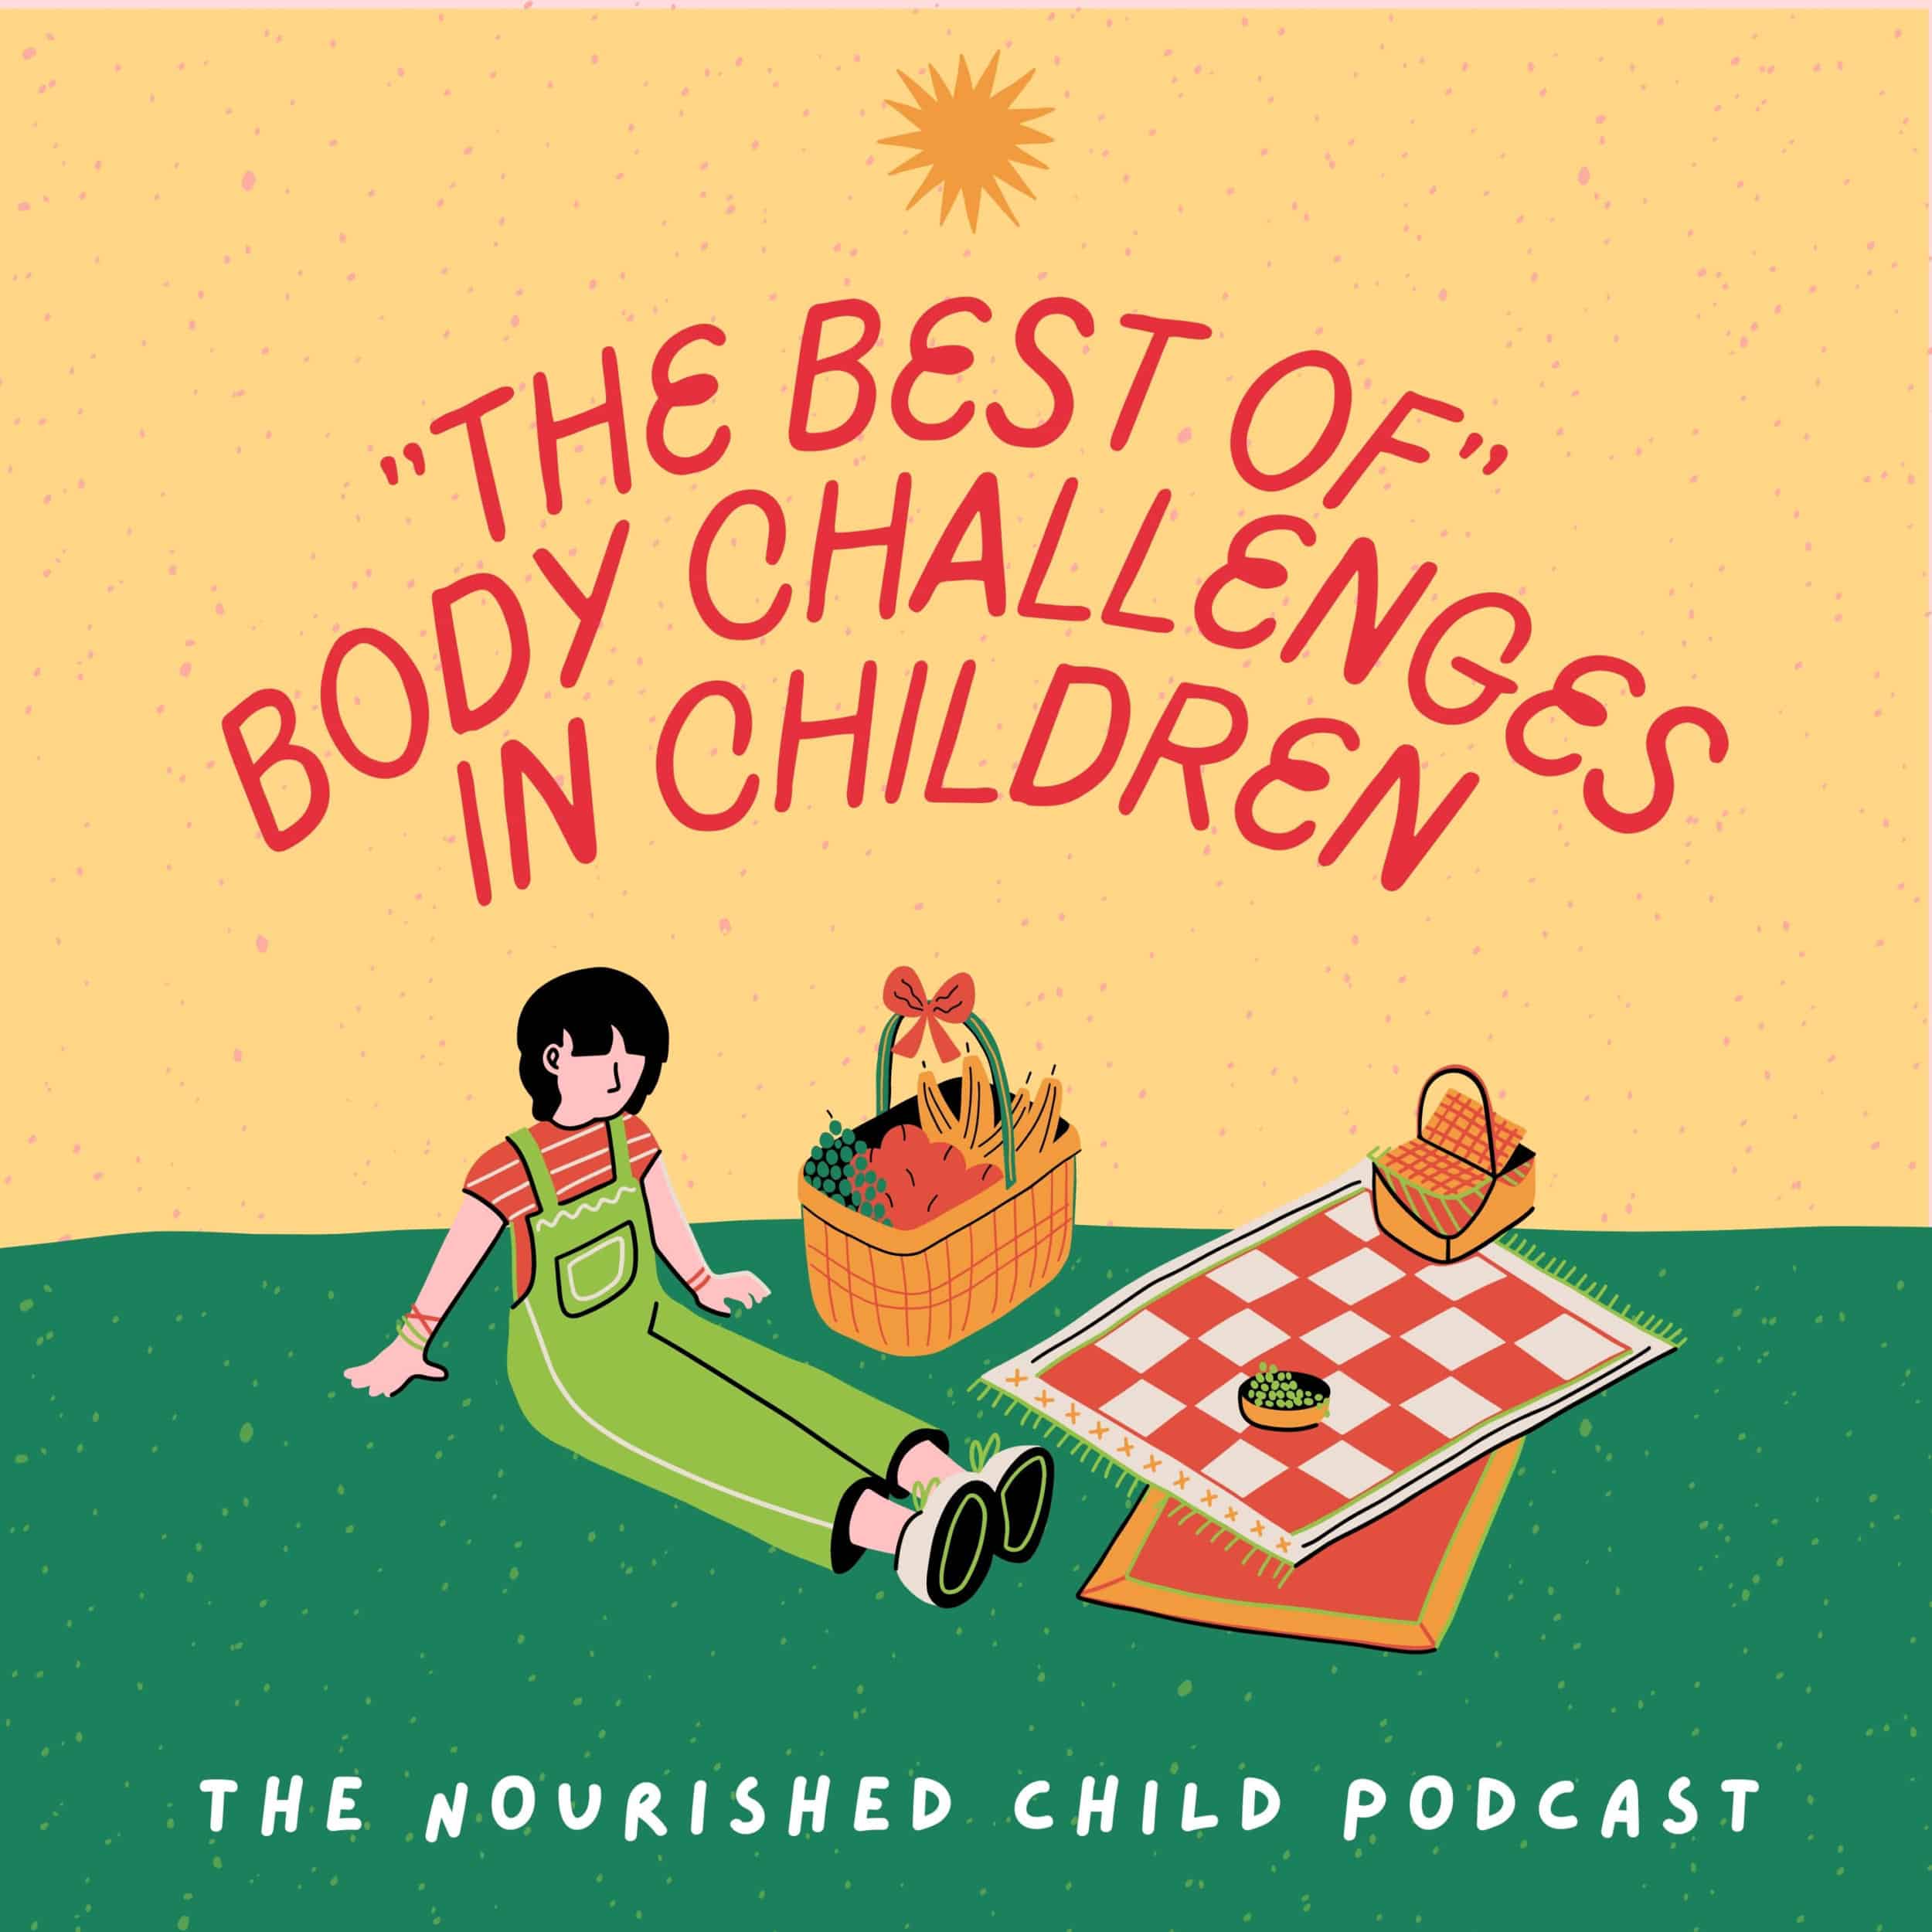 Body Challenges in Children on The Nourished Child